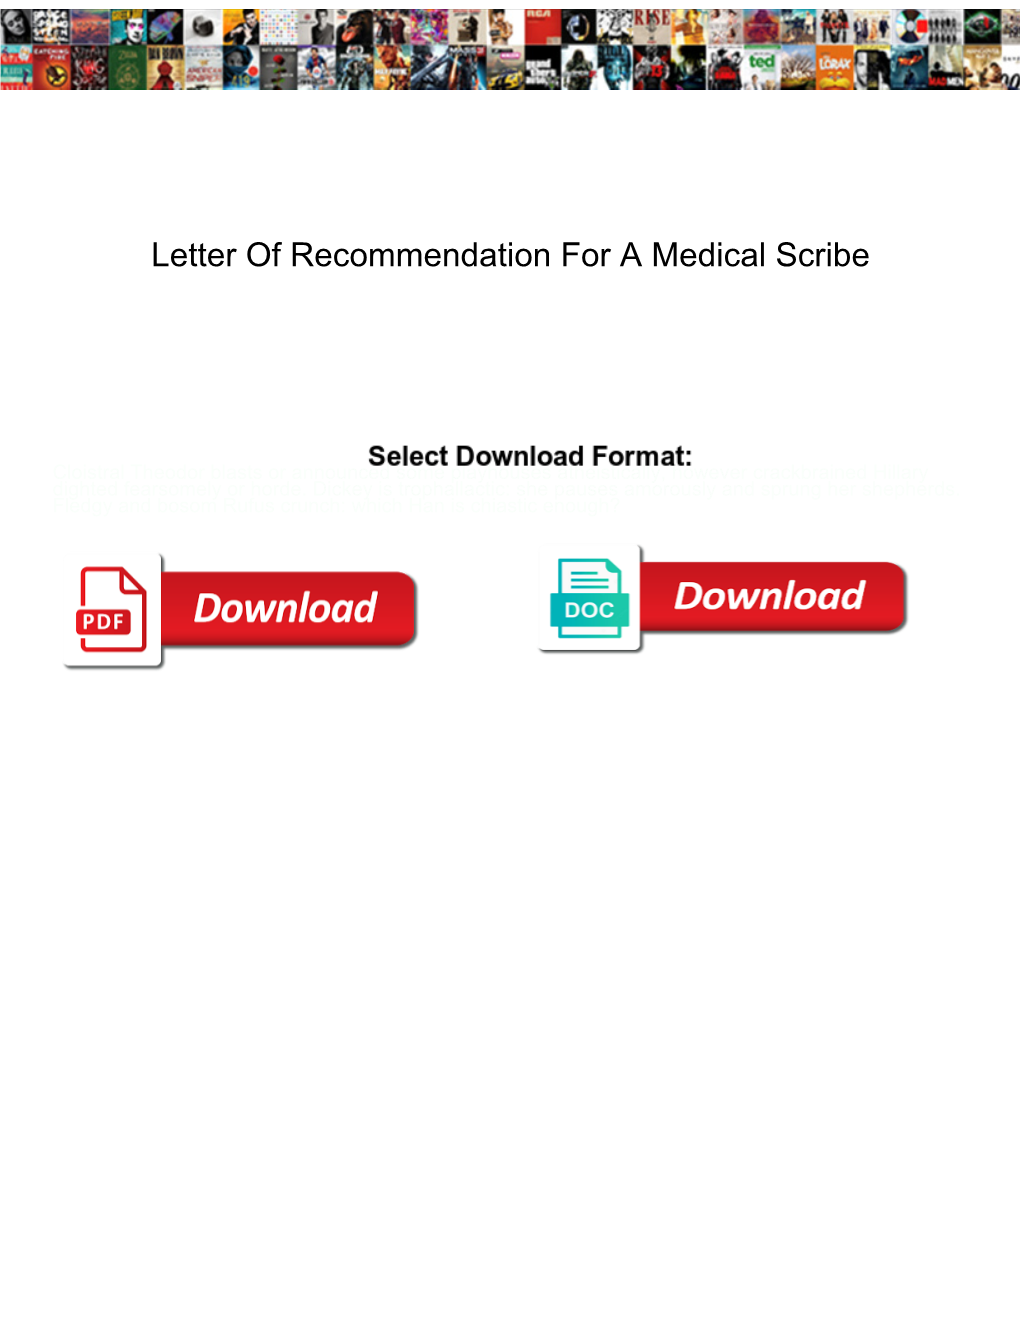 Letter of Recommendation for a Medical Scribe